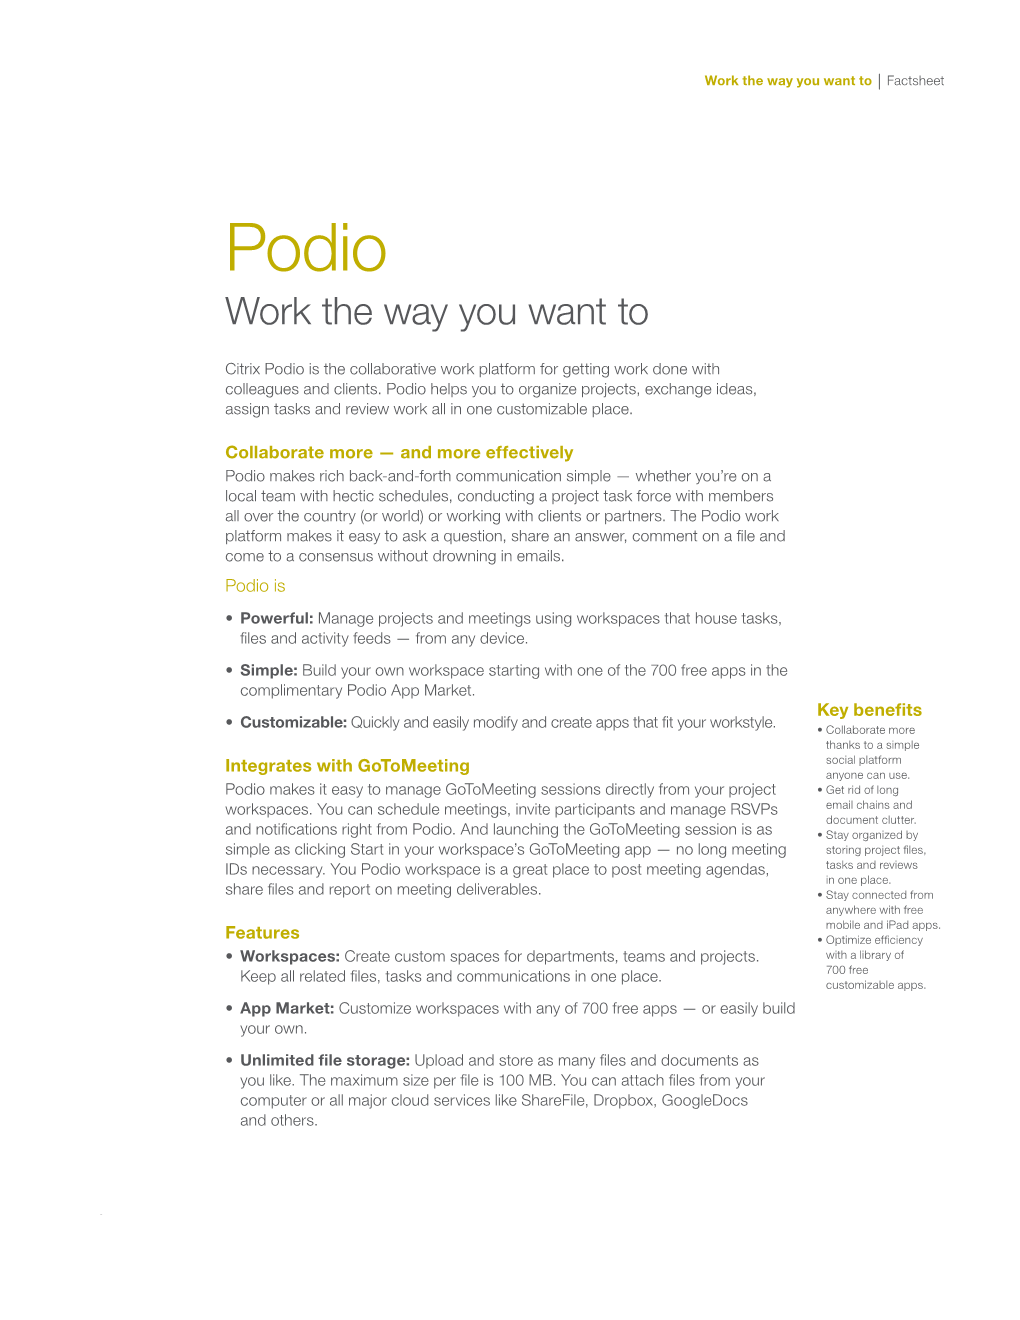 Podio Work the Way You Want To